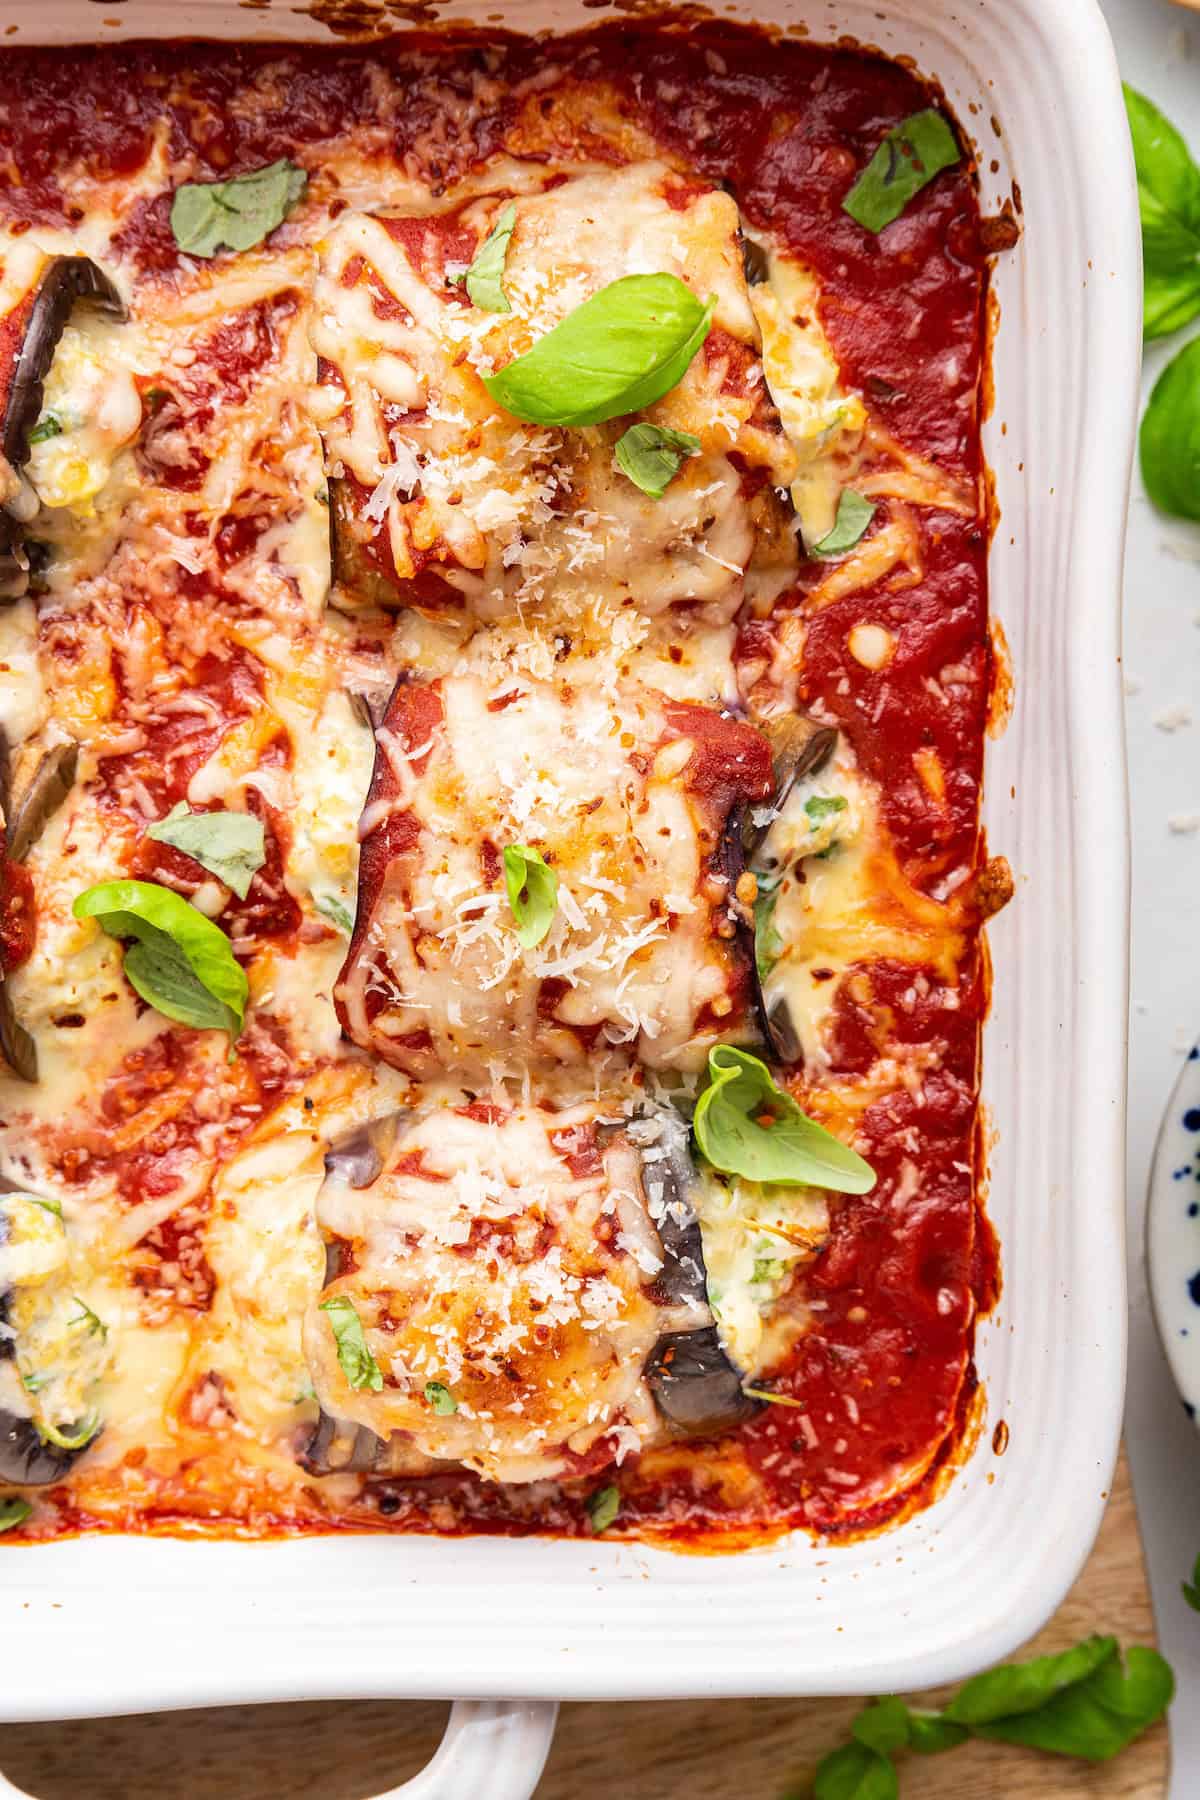 Overhead view of eggplant rollatini with cheese and marinara